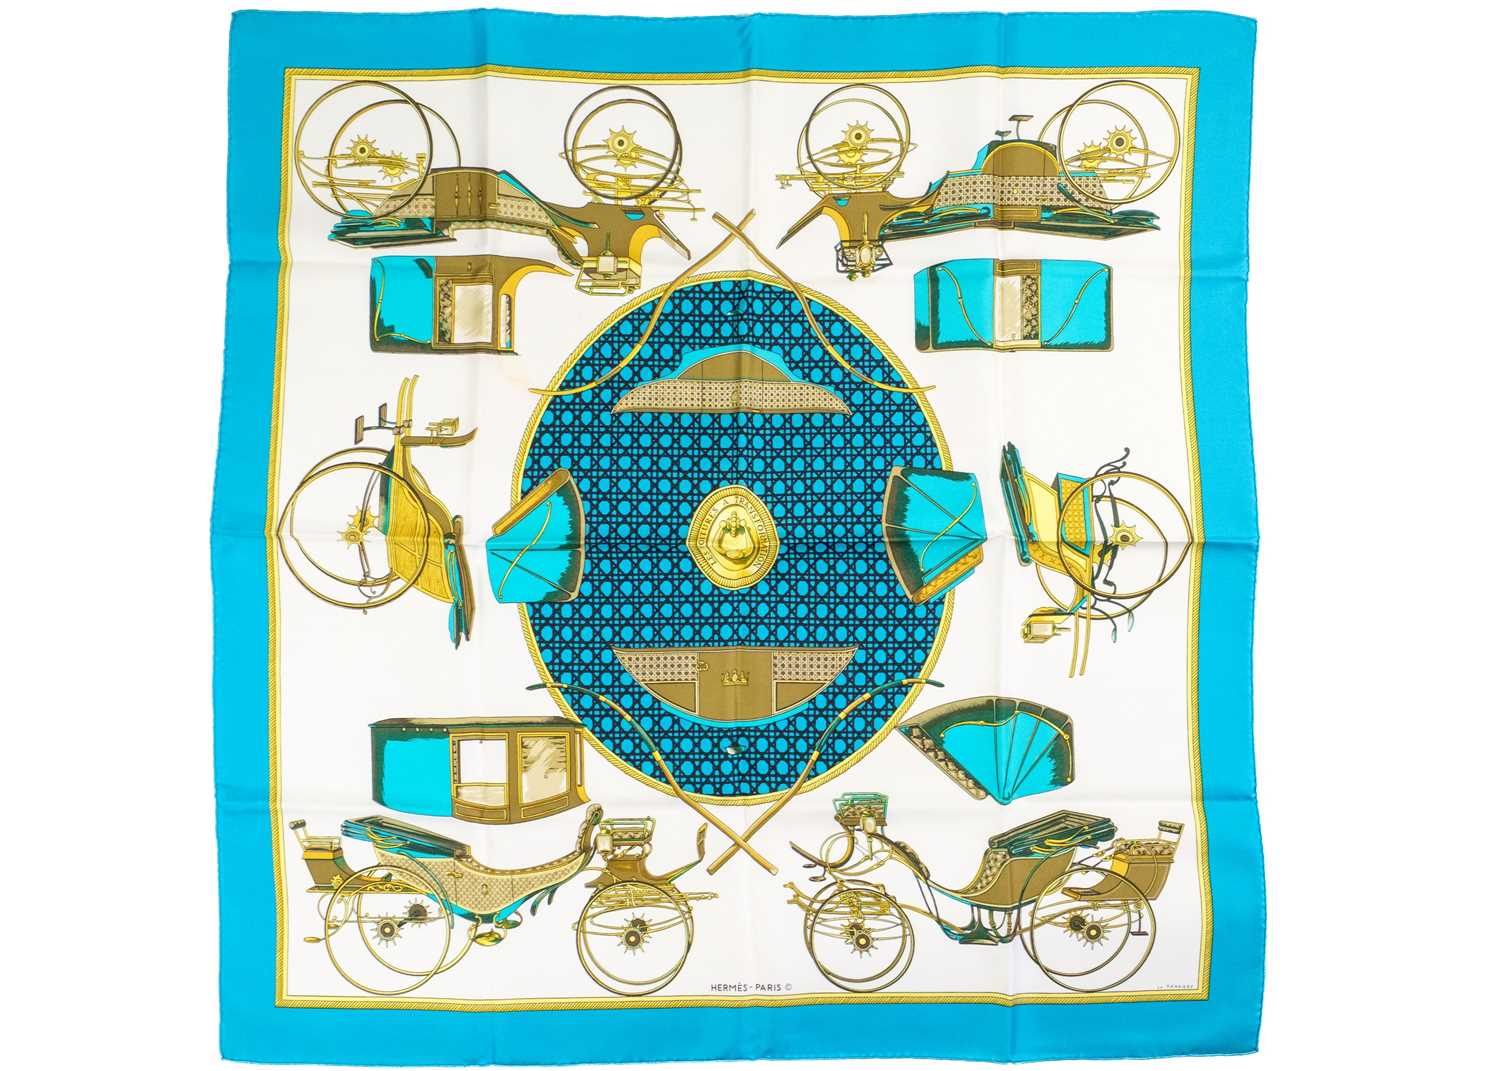 HERMES - A silk scarf in 'Les voitures a transformation' pattern designed by La Perriere.